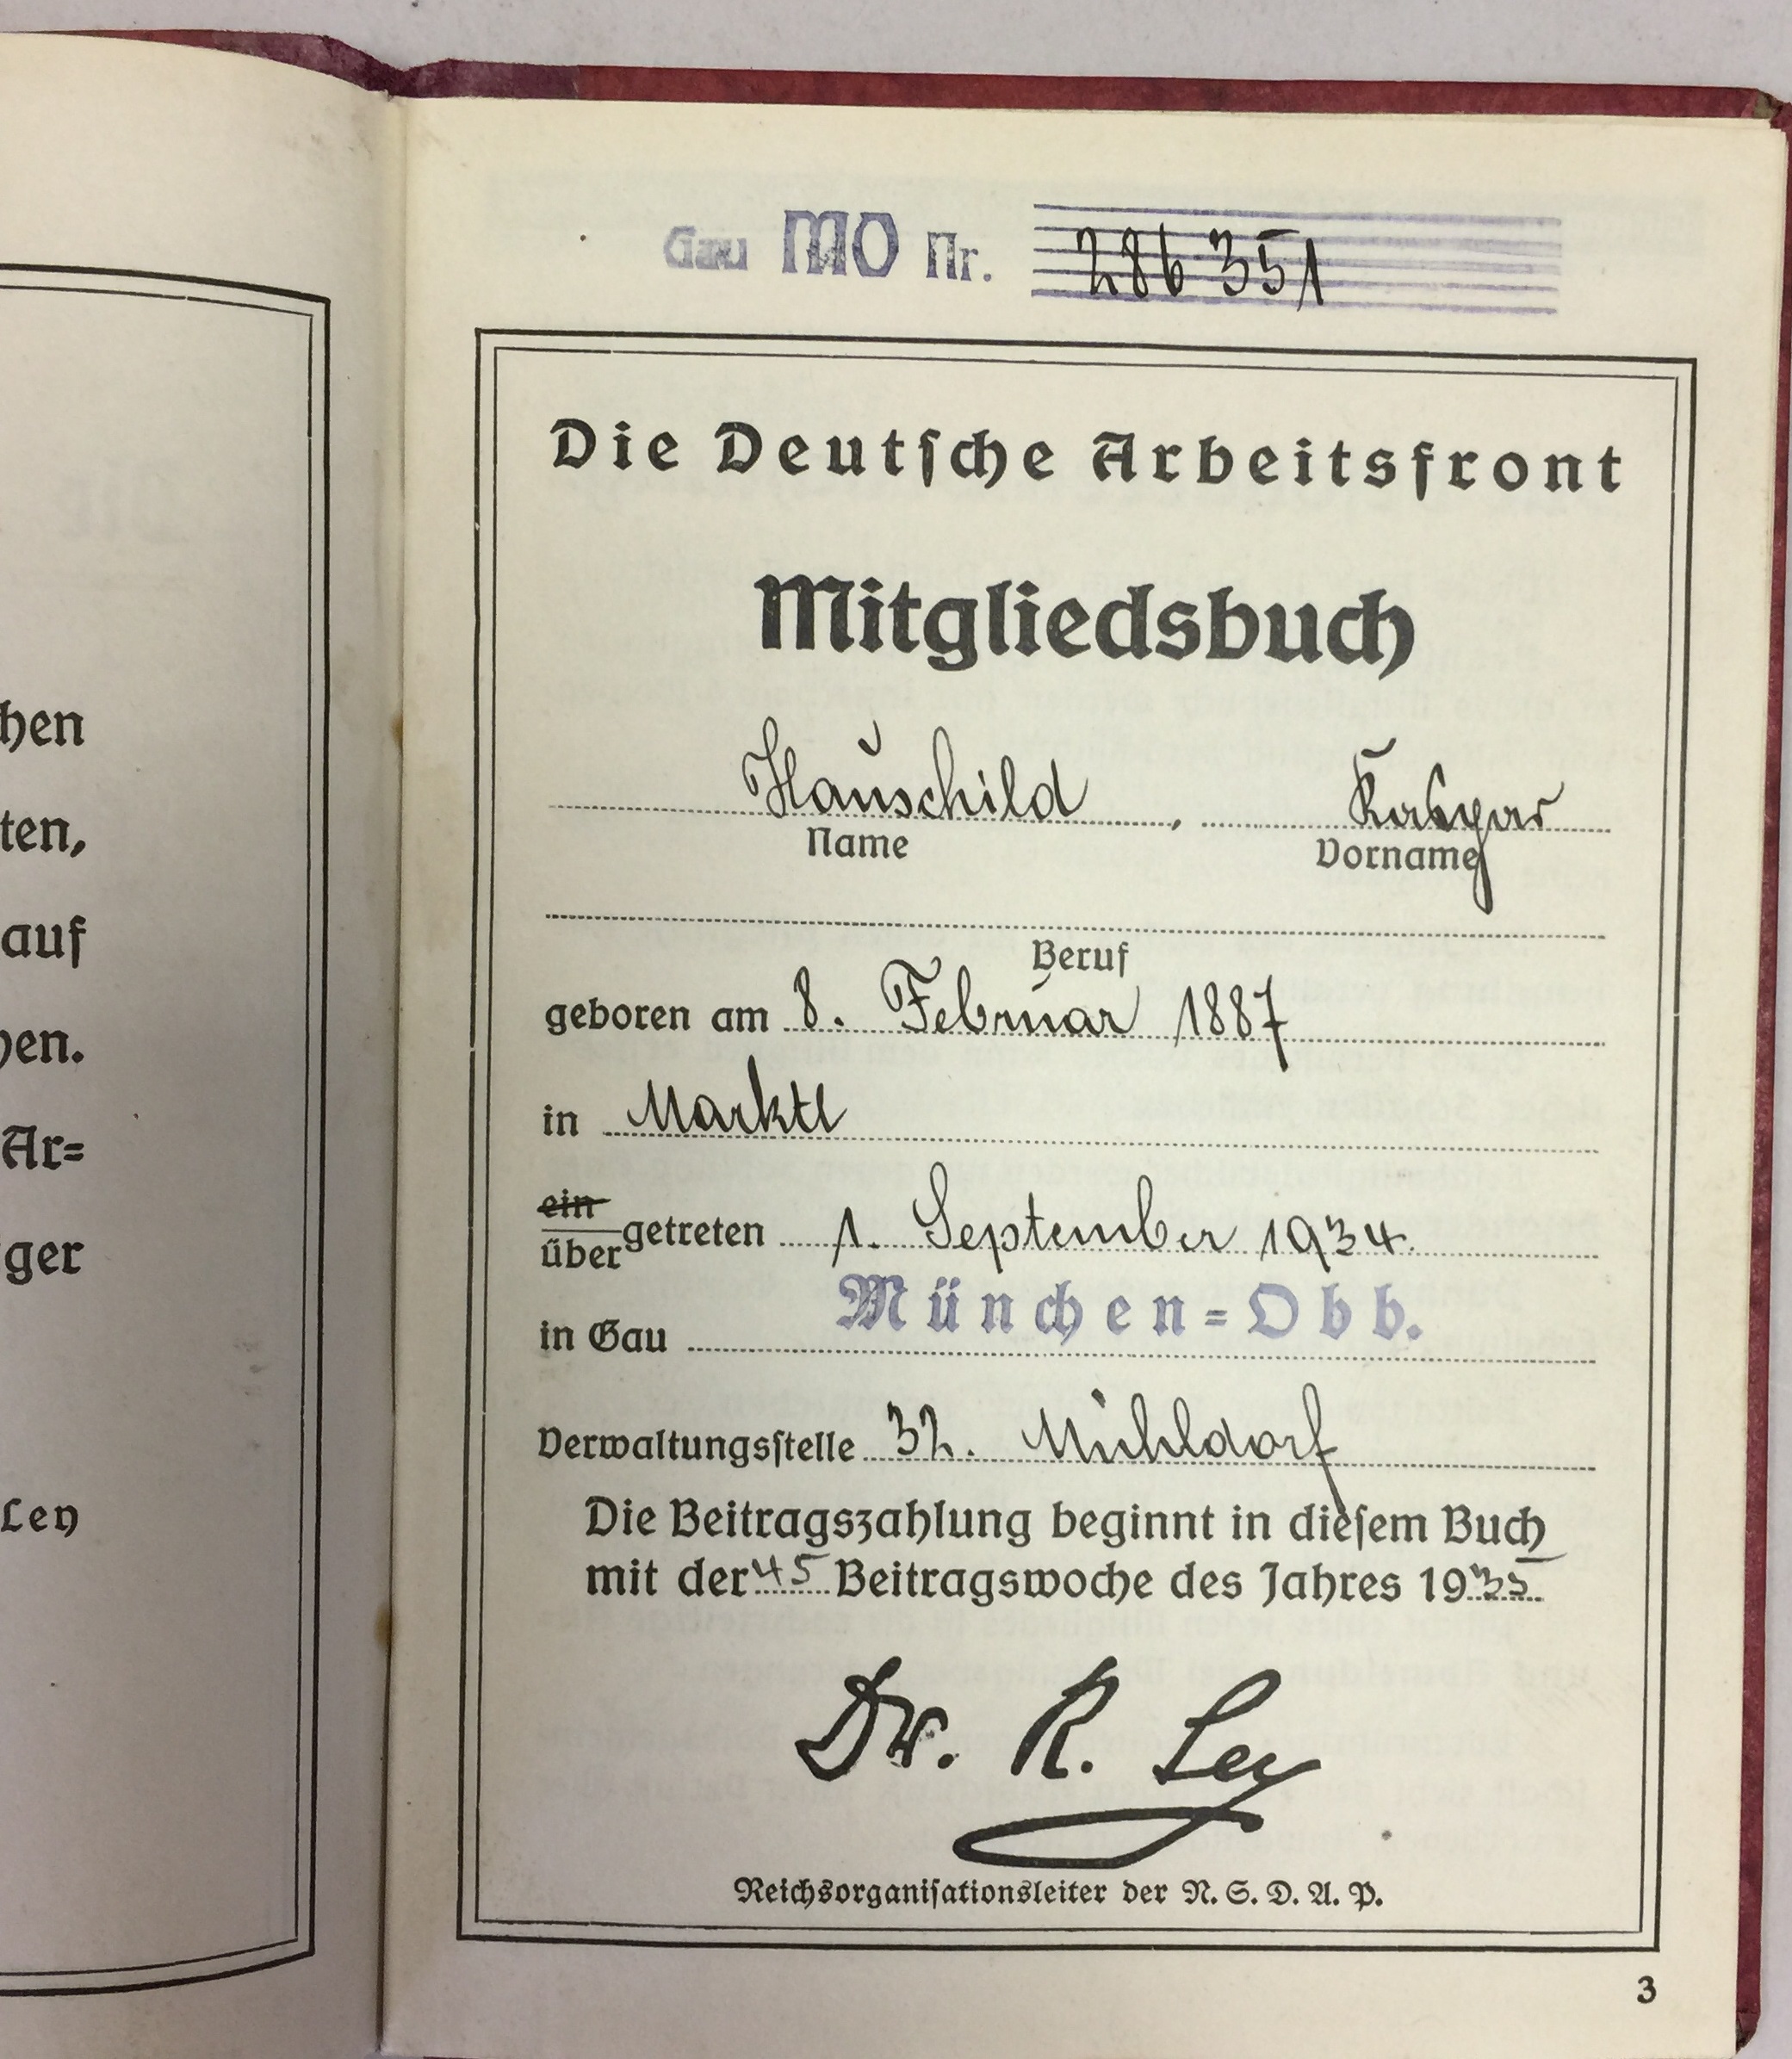 THIRD REICH MEMBERSHIP BOOKS AND DEATH NOTICE. 8 Third Reich "mitgliedsbuchs" dating from 1934-1938. - Image 3 of 4